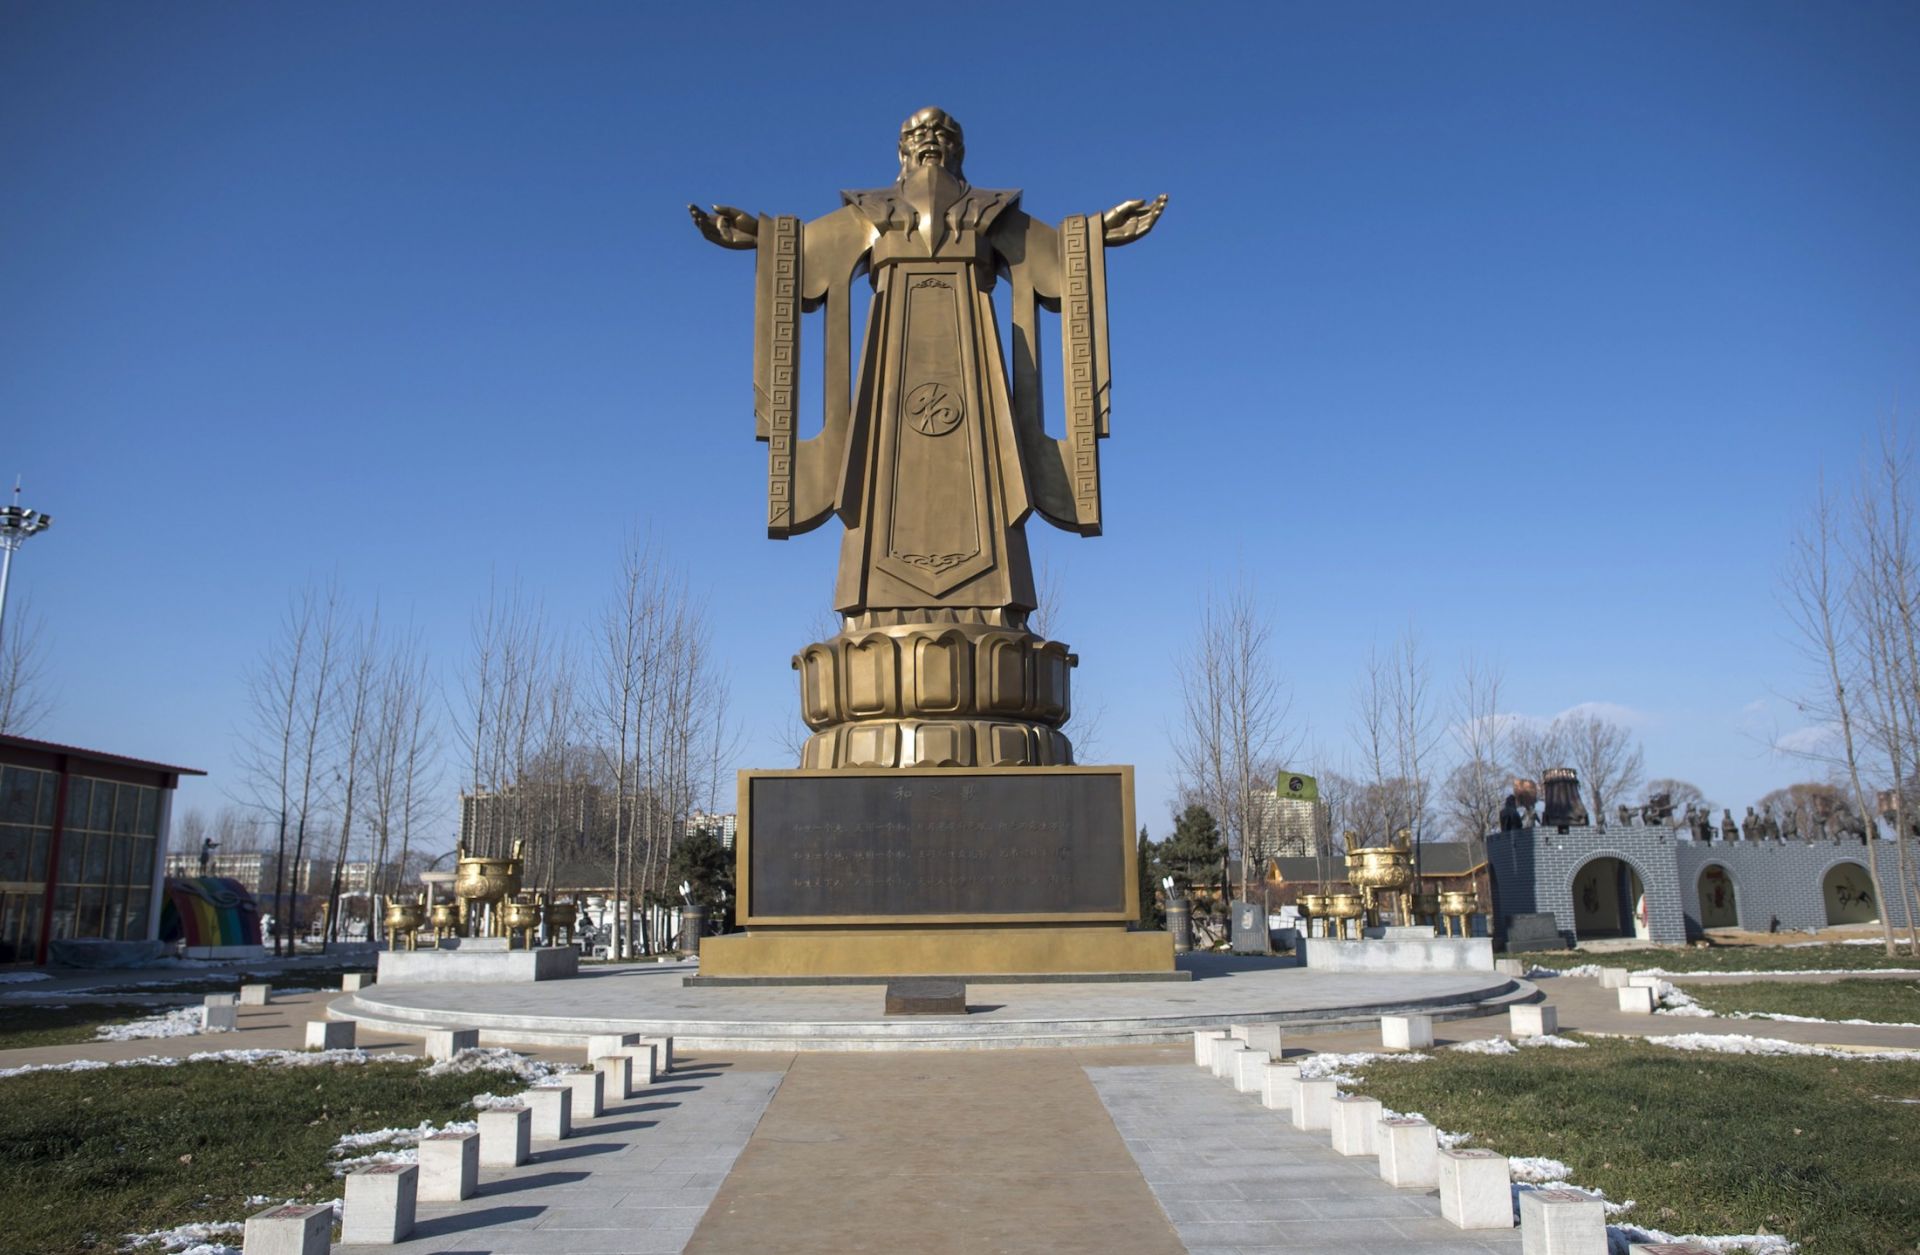 A statue of Confucius stands in the Chinese resort town of Beidaihe in this photo taken Dec. 12, 2014.